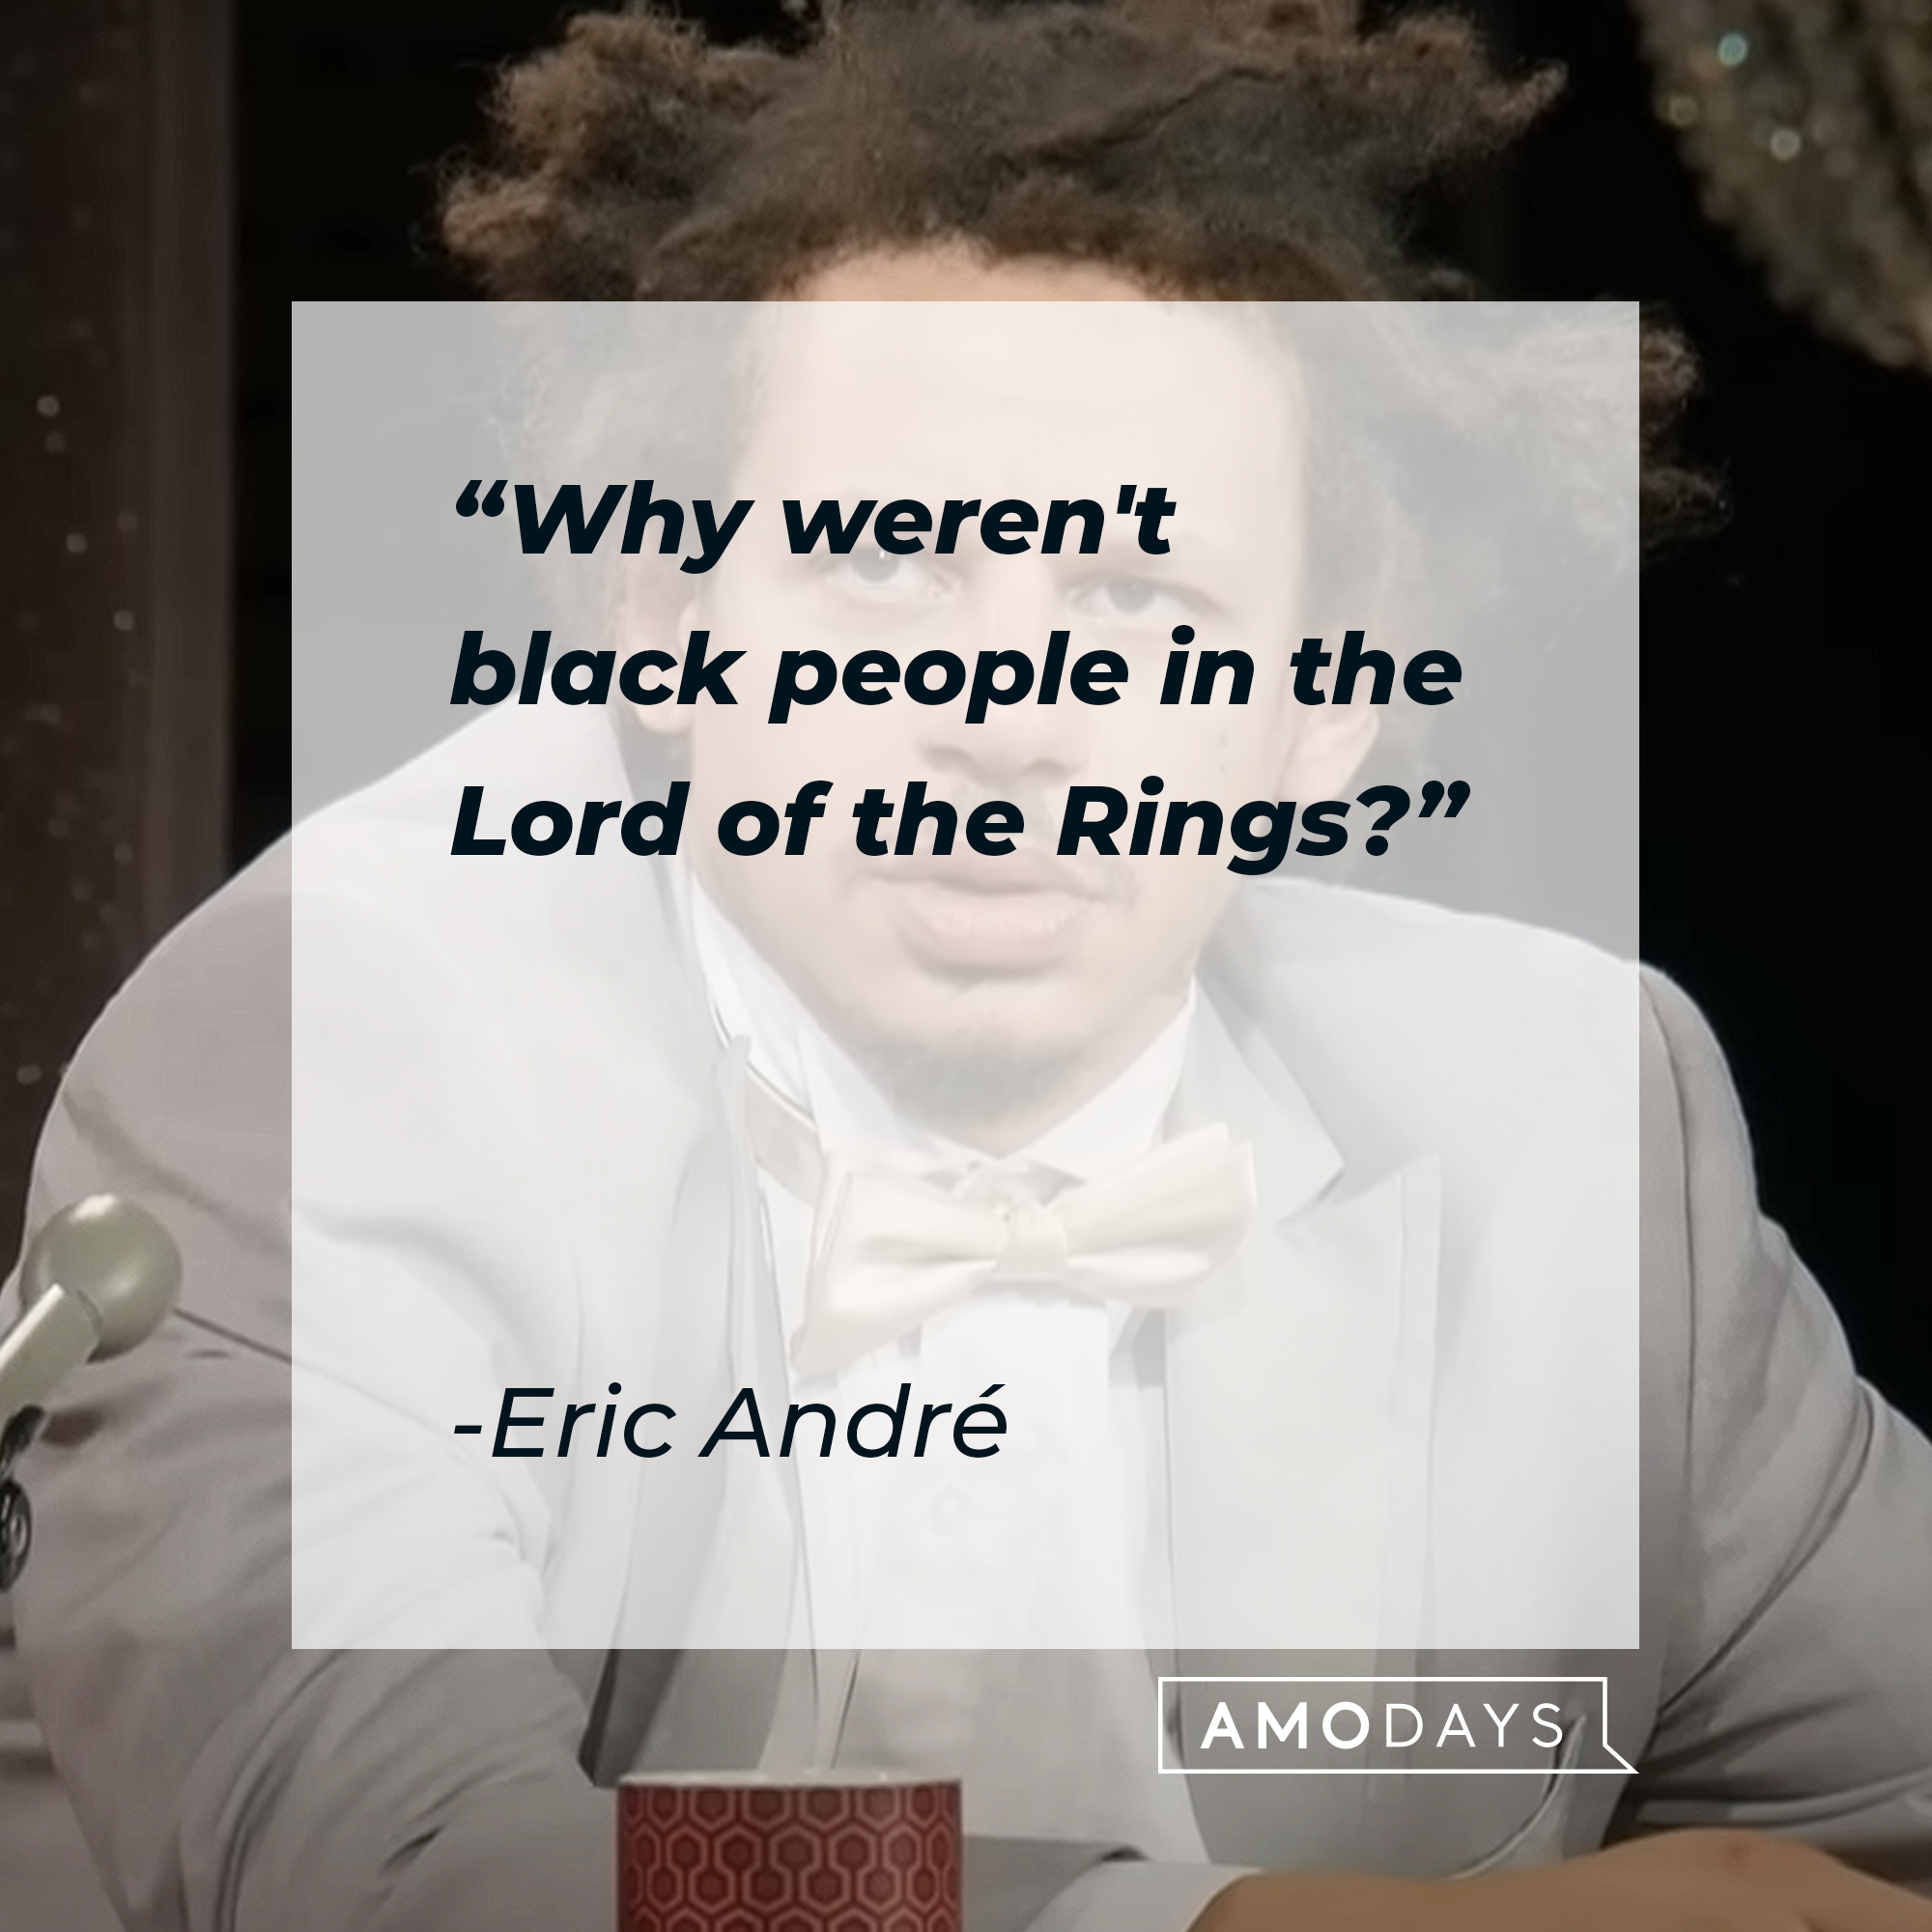 Eric André's quote: "Why weren't black people in the Lord of the Rings?" | Source: Youtube.com/adultswim